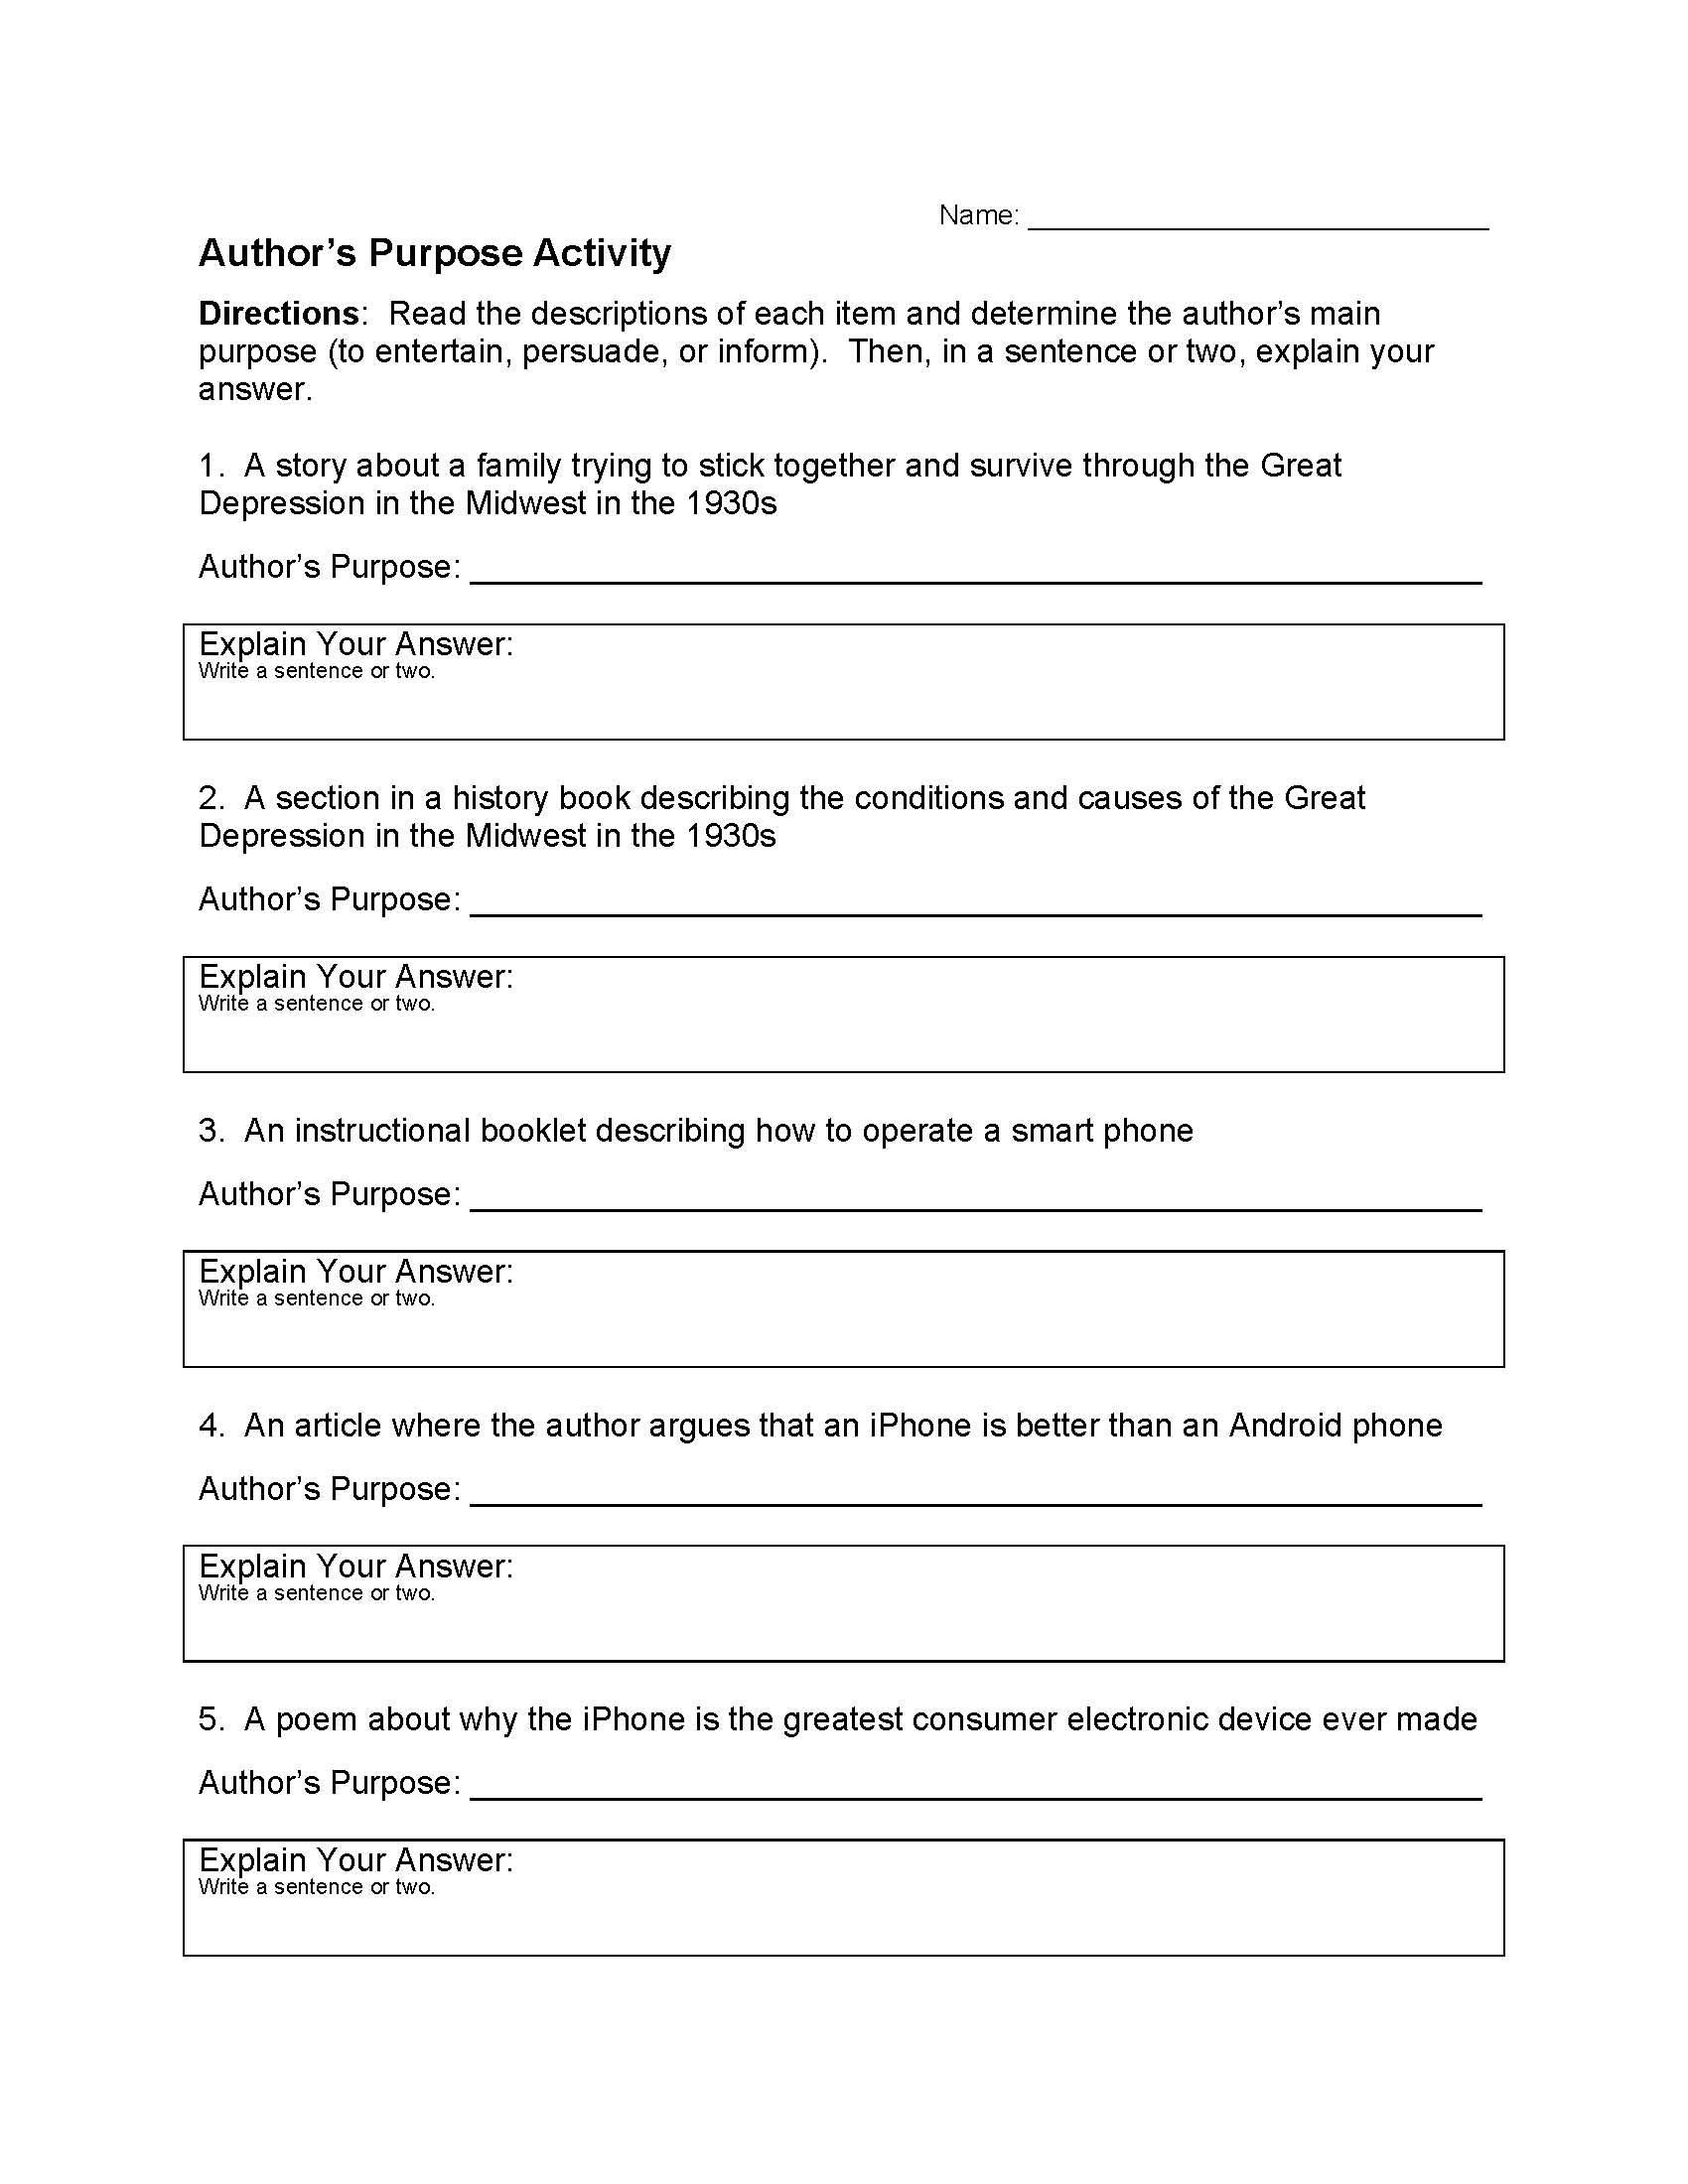 do-does-questions-worksheet-does-questions-esl-worksheet-by-bkkteacher-jaylon-acosta